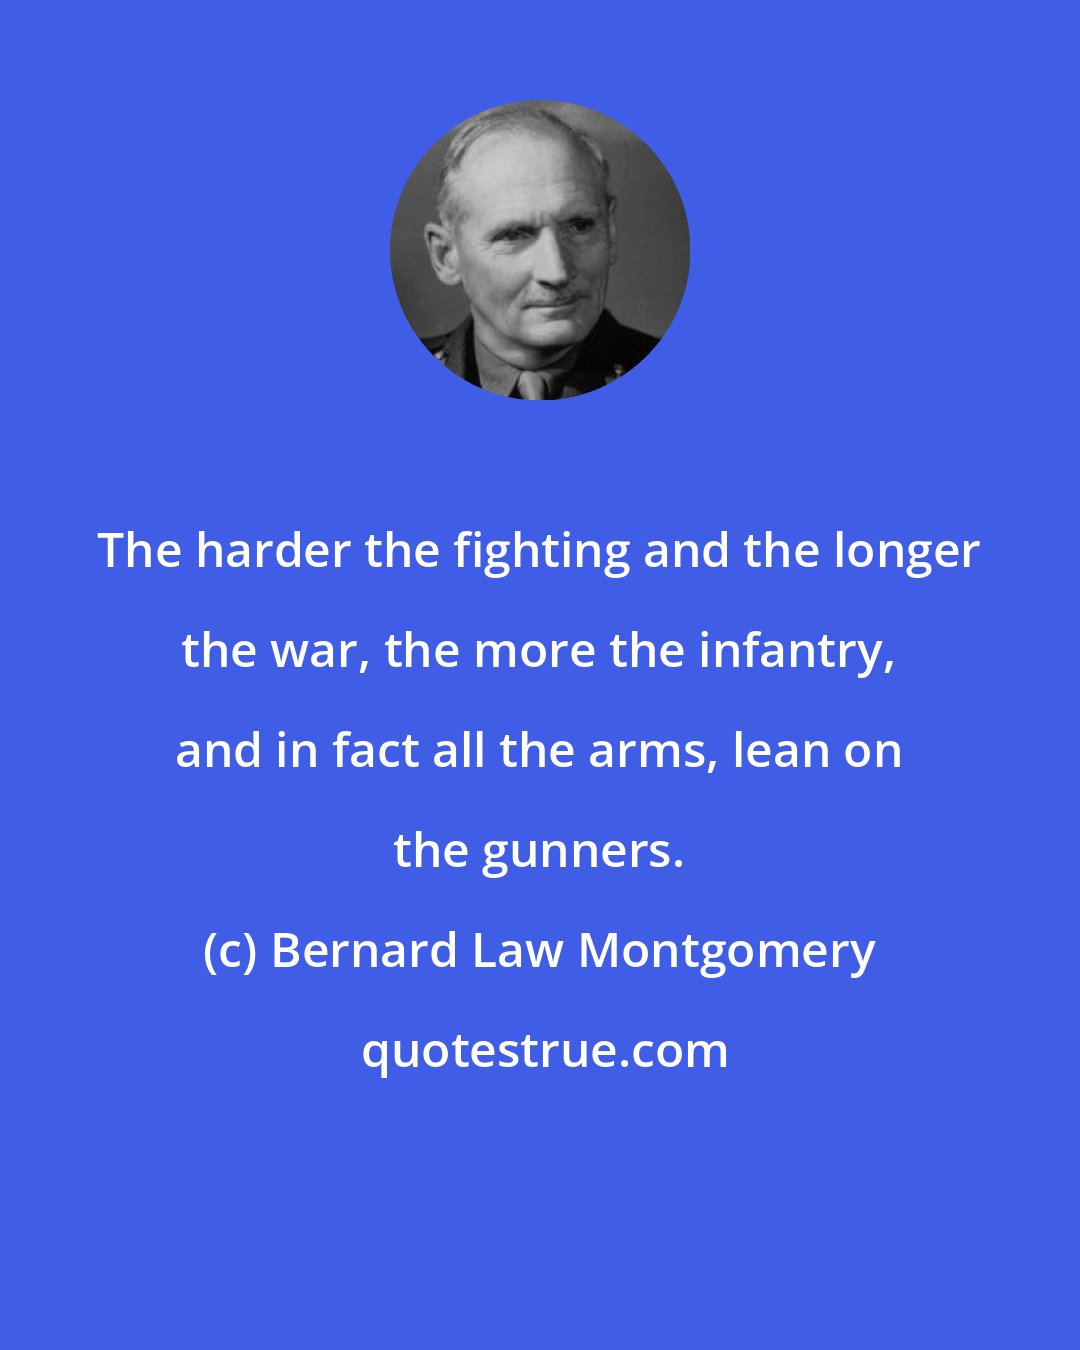 Bernard Law Montgomery: The harder the fighting and the longer the war, the more the infantry, and in fact all the arms, lean on the gunners.